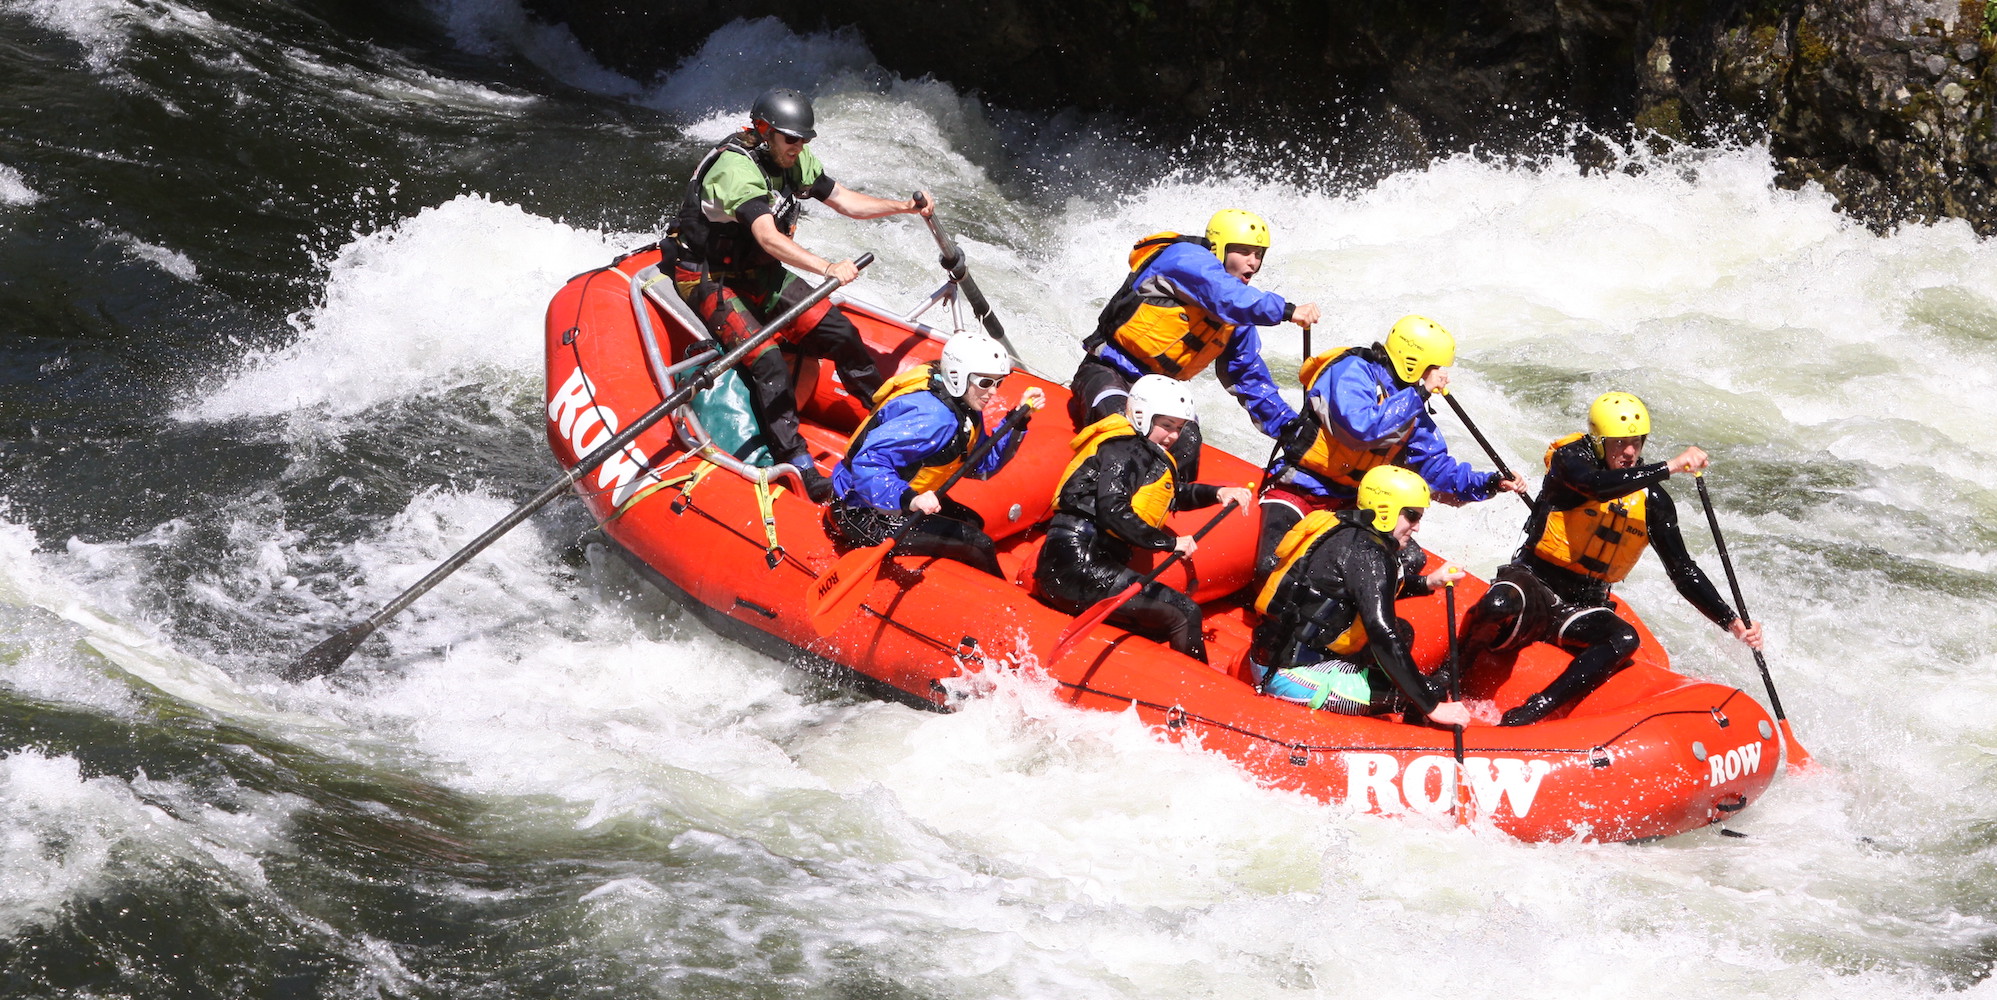 Six paddlers and a river guide on the oars rowing through a big whitewater rapid on Idahos best big water river